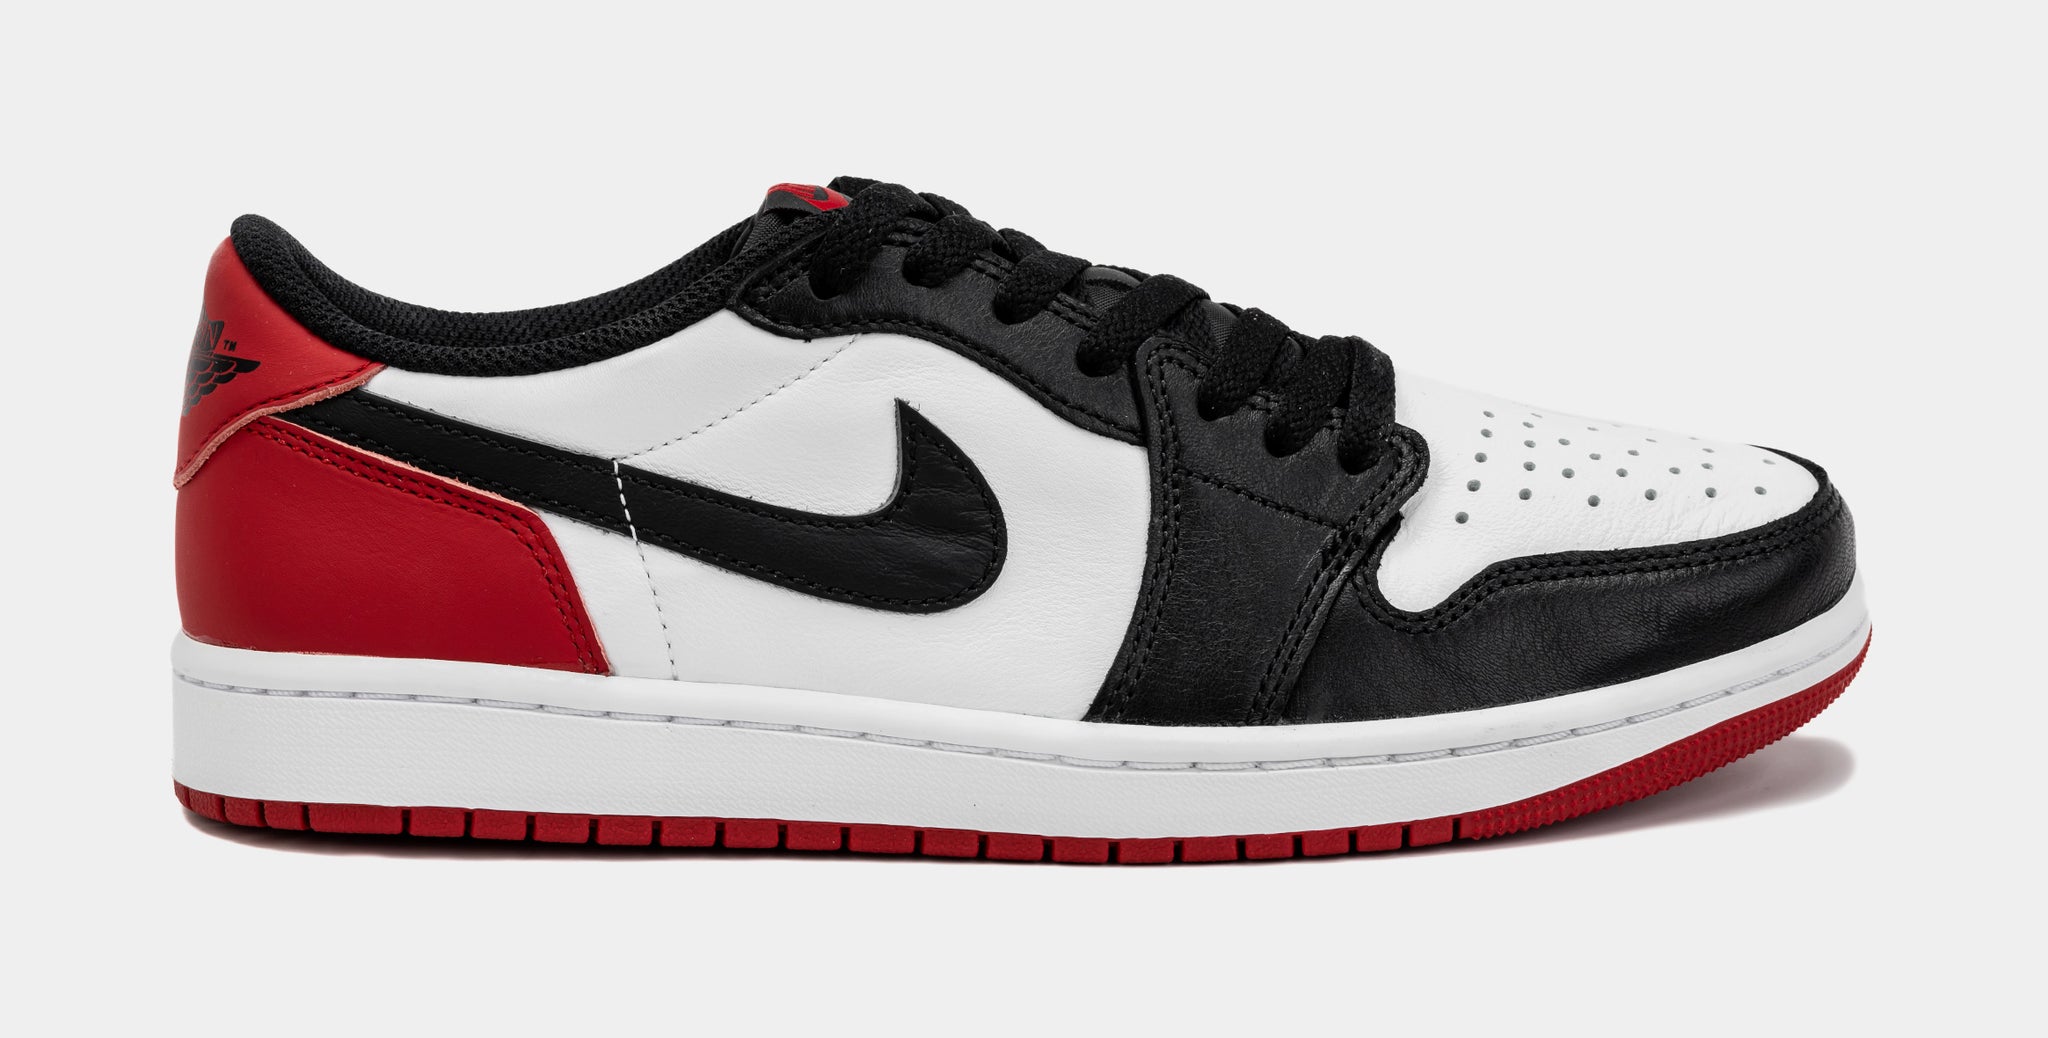 Men's Air Jordan Retro 1 Low Basketball Shoes in Red Size 8.0 | Leather